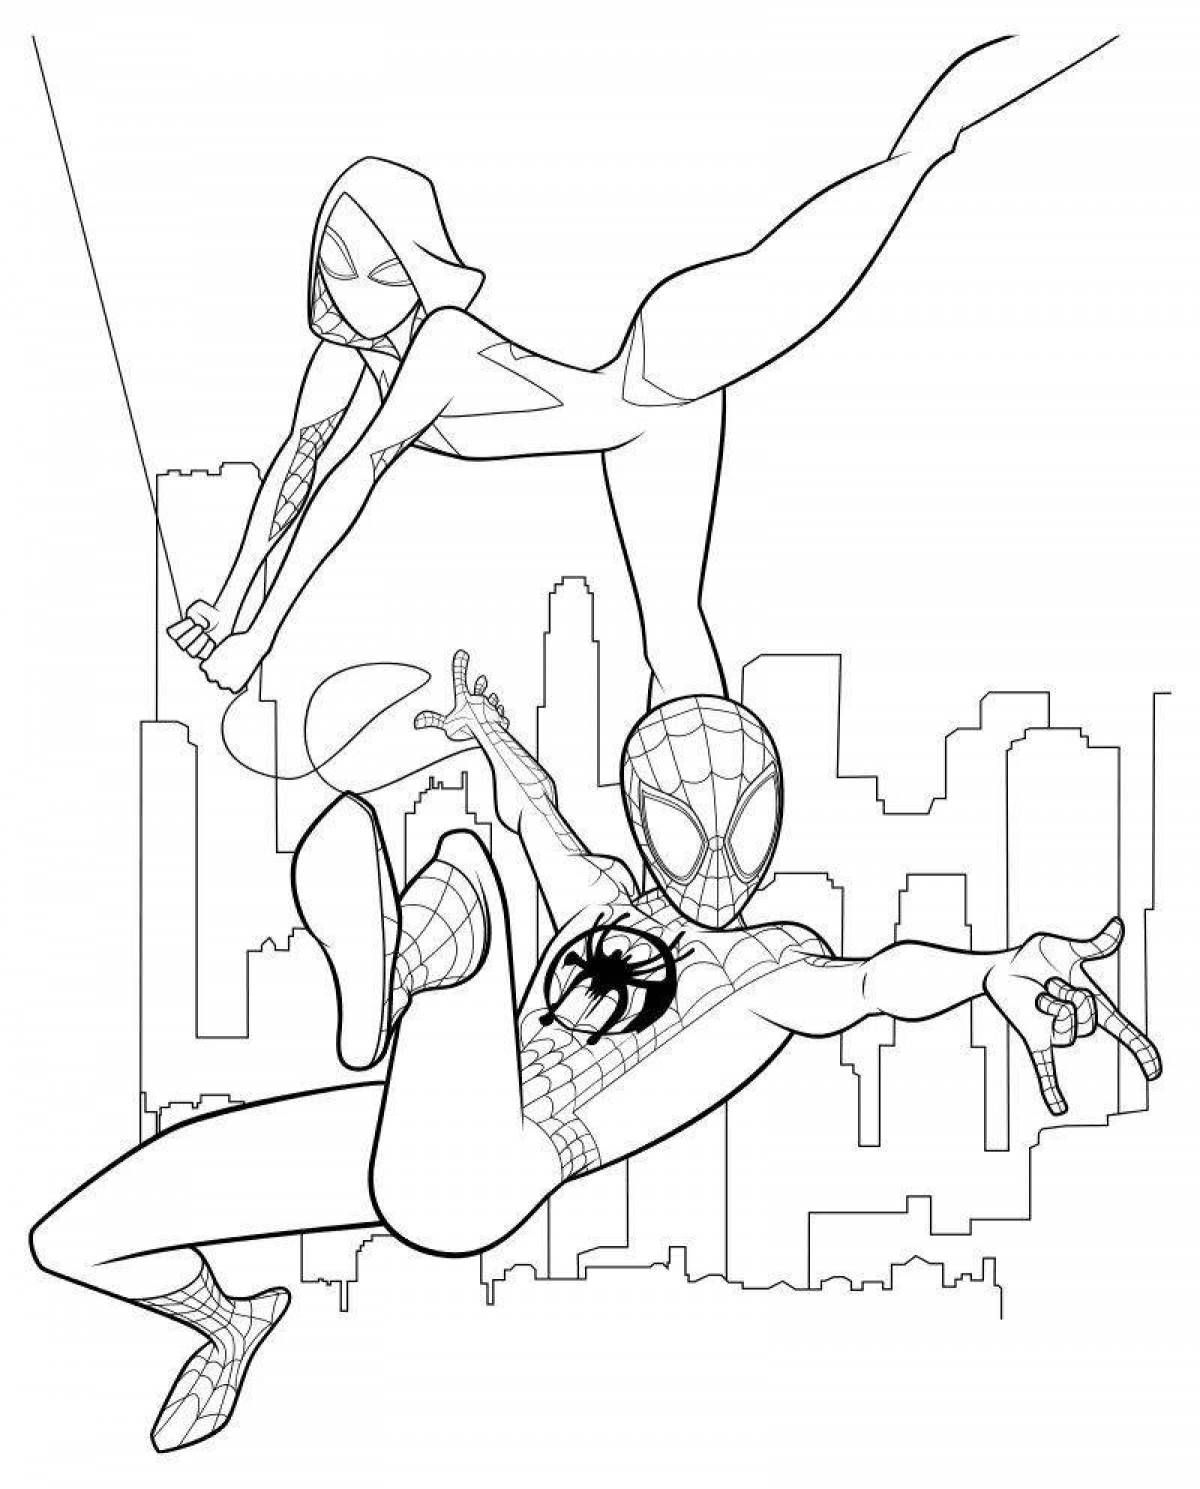 Nerving spiderman ghost coloring page